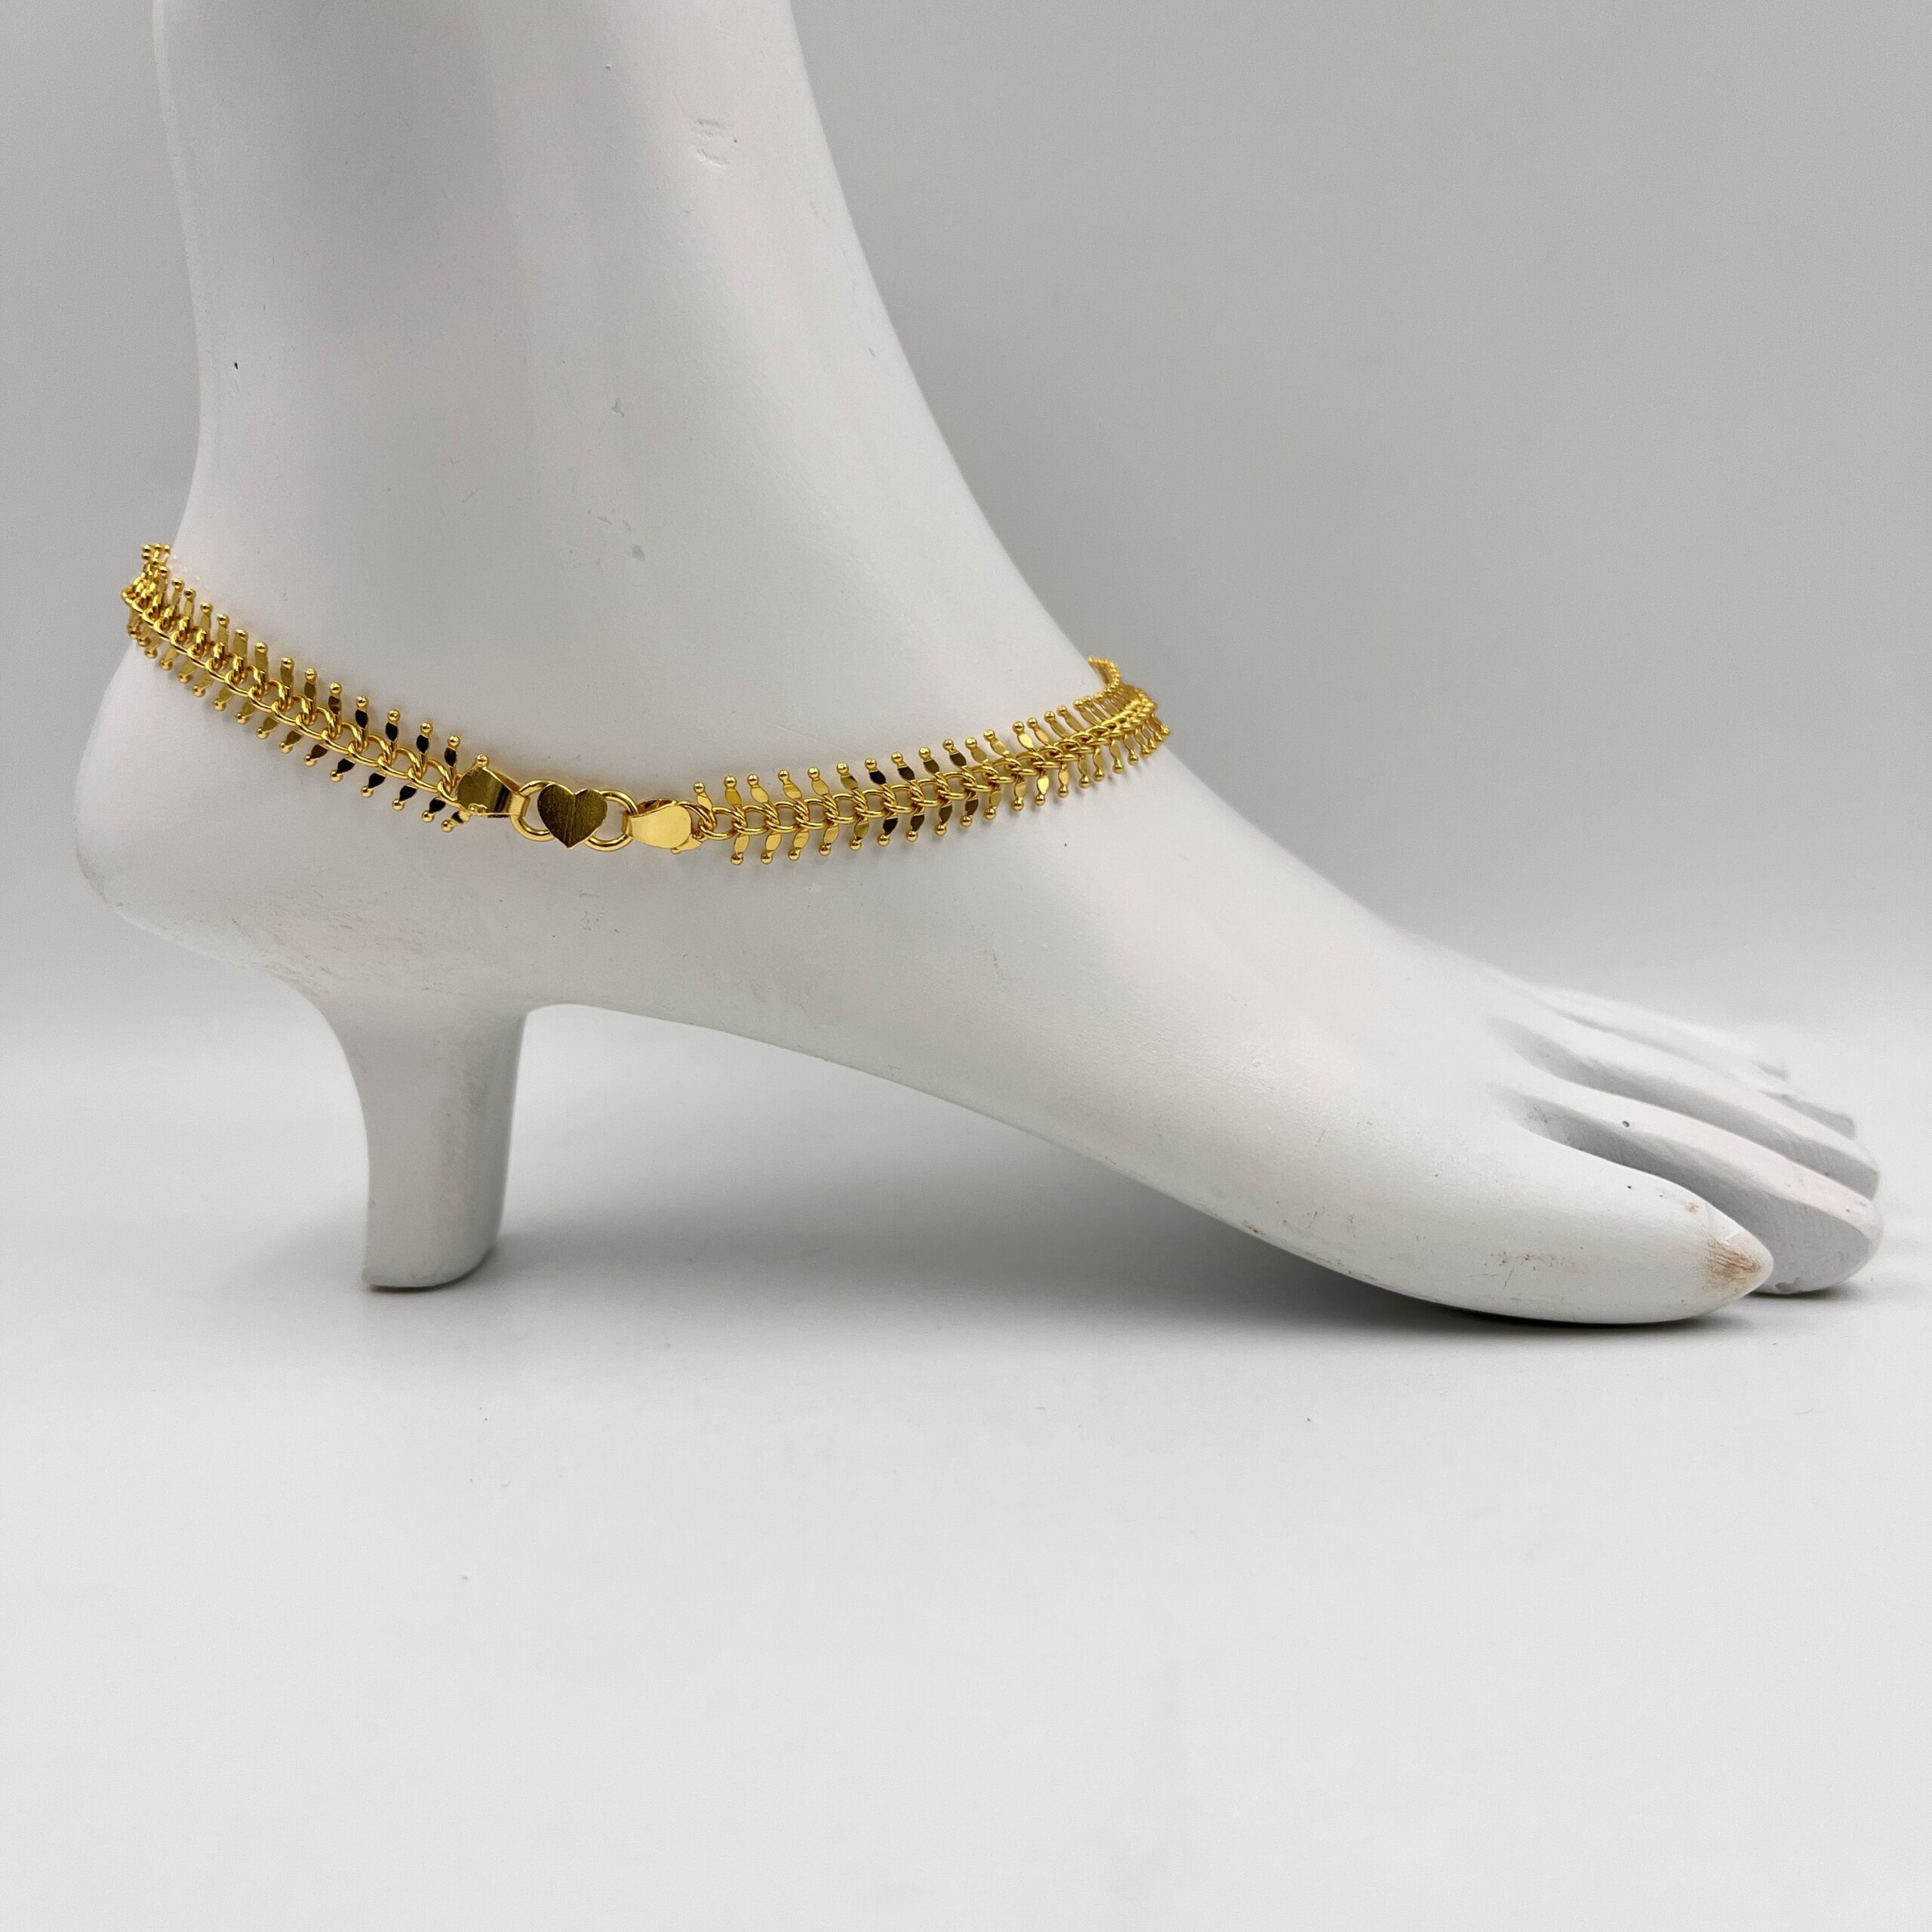 How Should an Anklet Fit? Pura Vida's Fool-Proof Anklet Size Guide